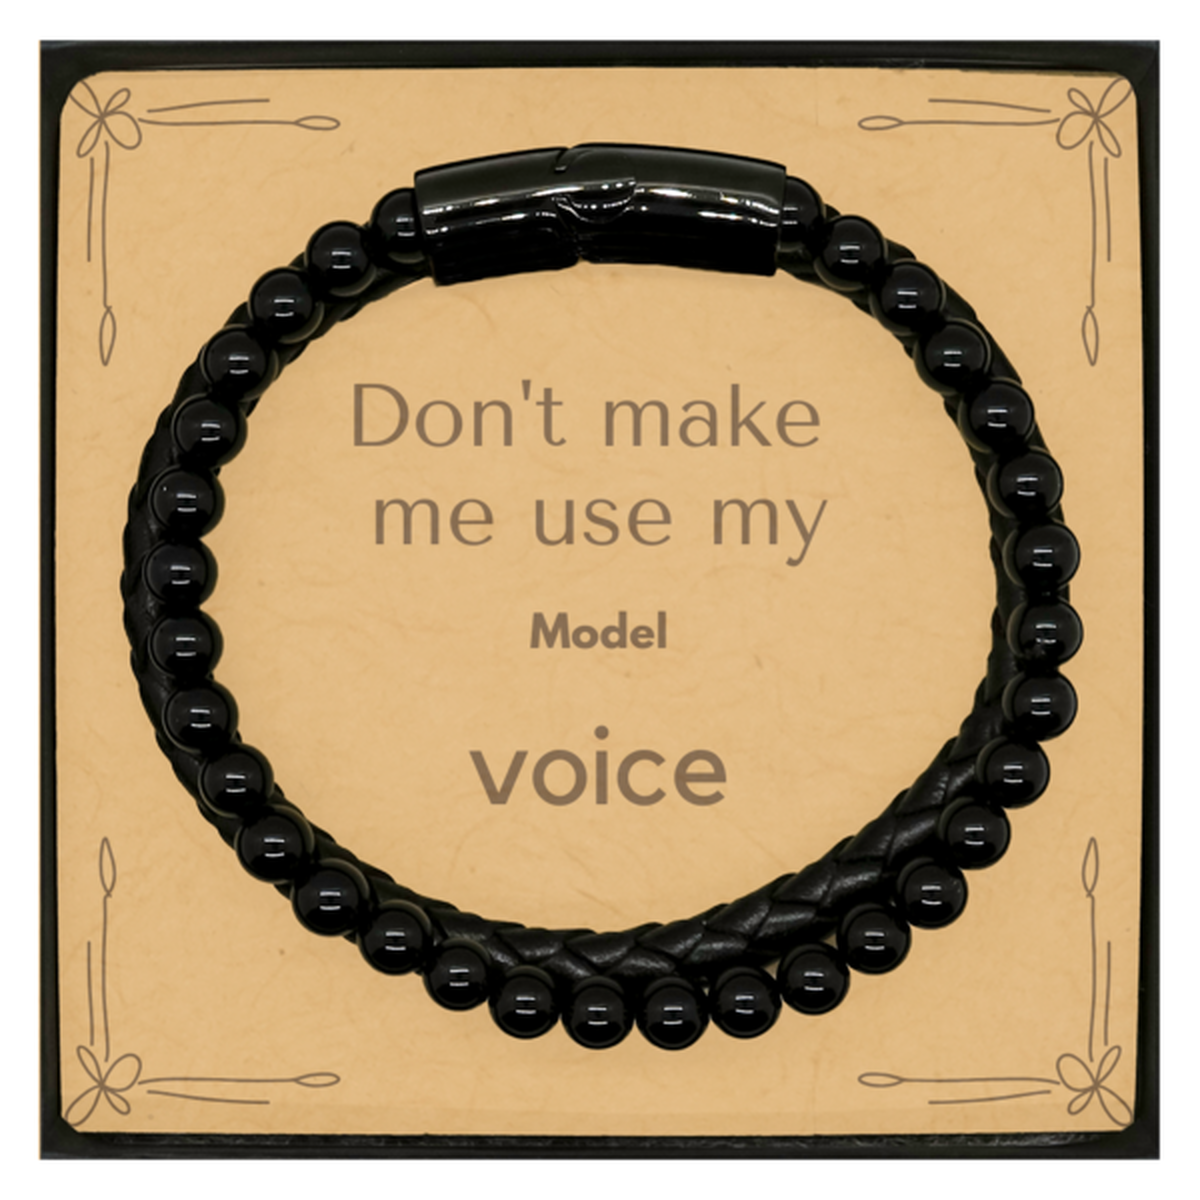 Don't make me use my Model voice, Sarcasm Model Card Gifts, Christmas Model Stone Leather Bracelets Birthday Unique Gifts For Model Coworkers, Men, Women, Colleague, Friends